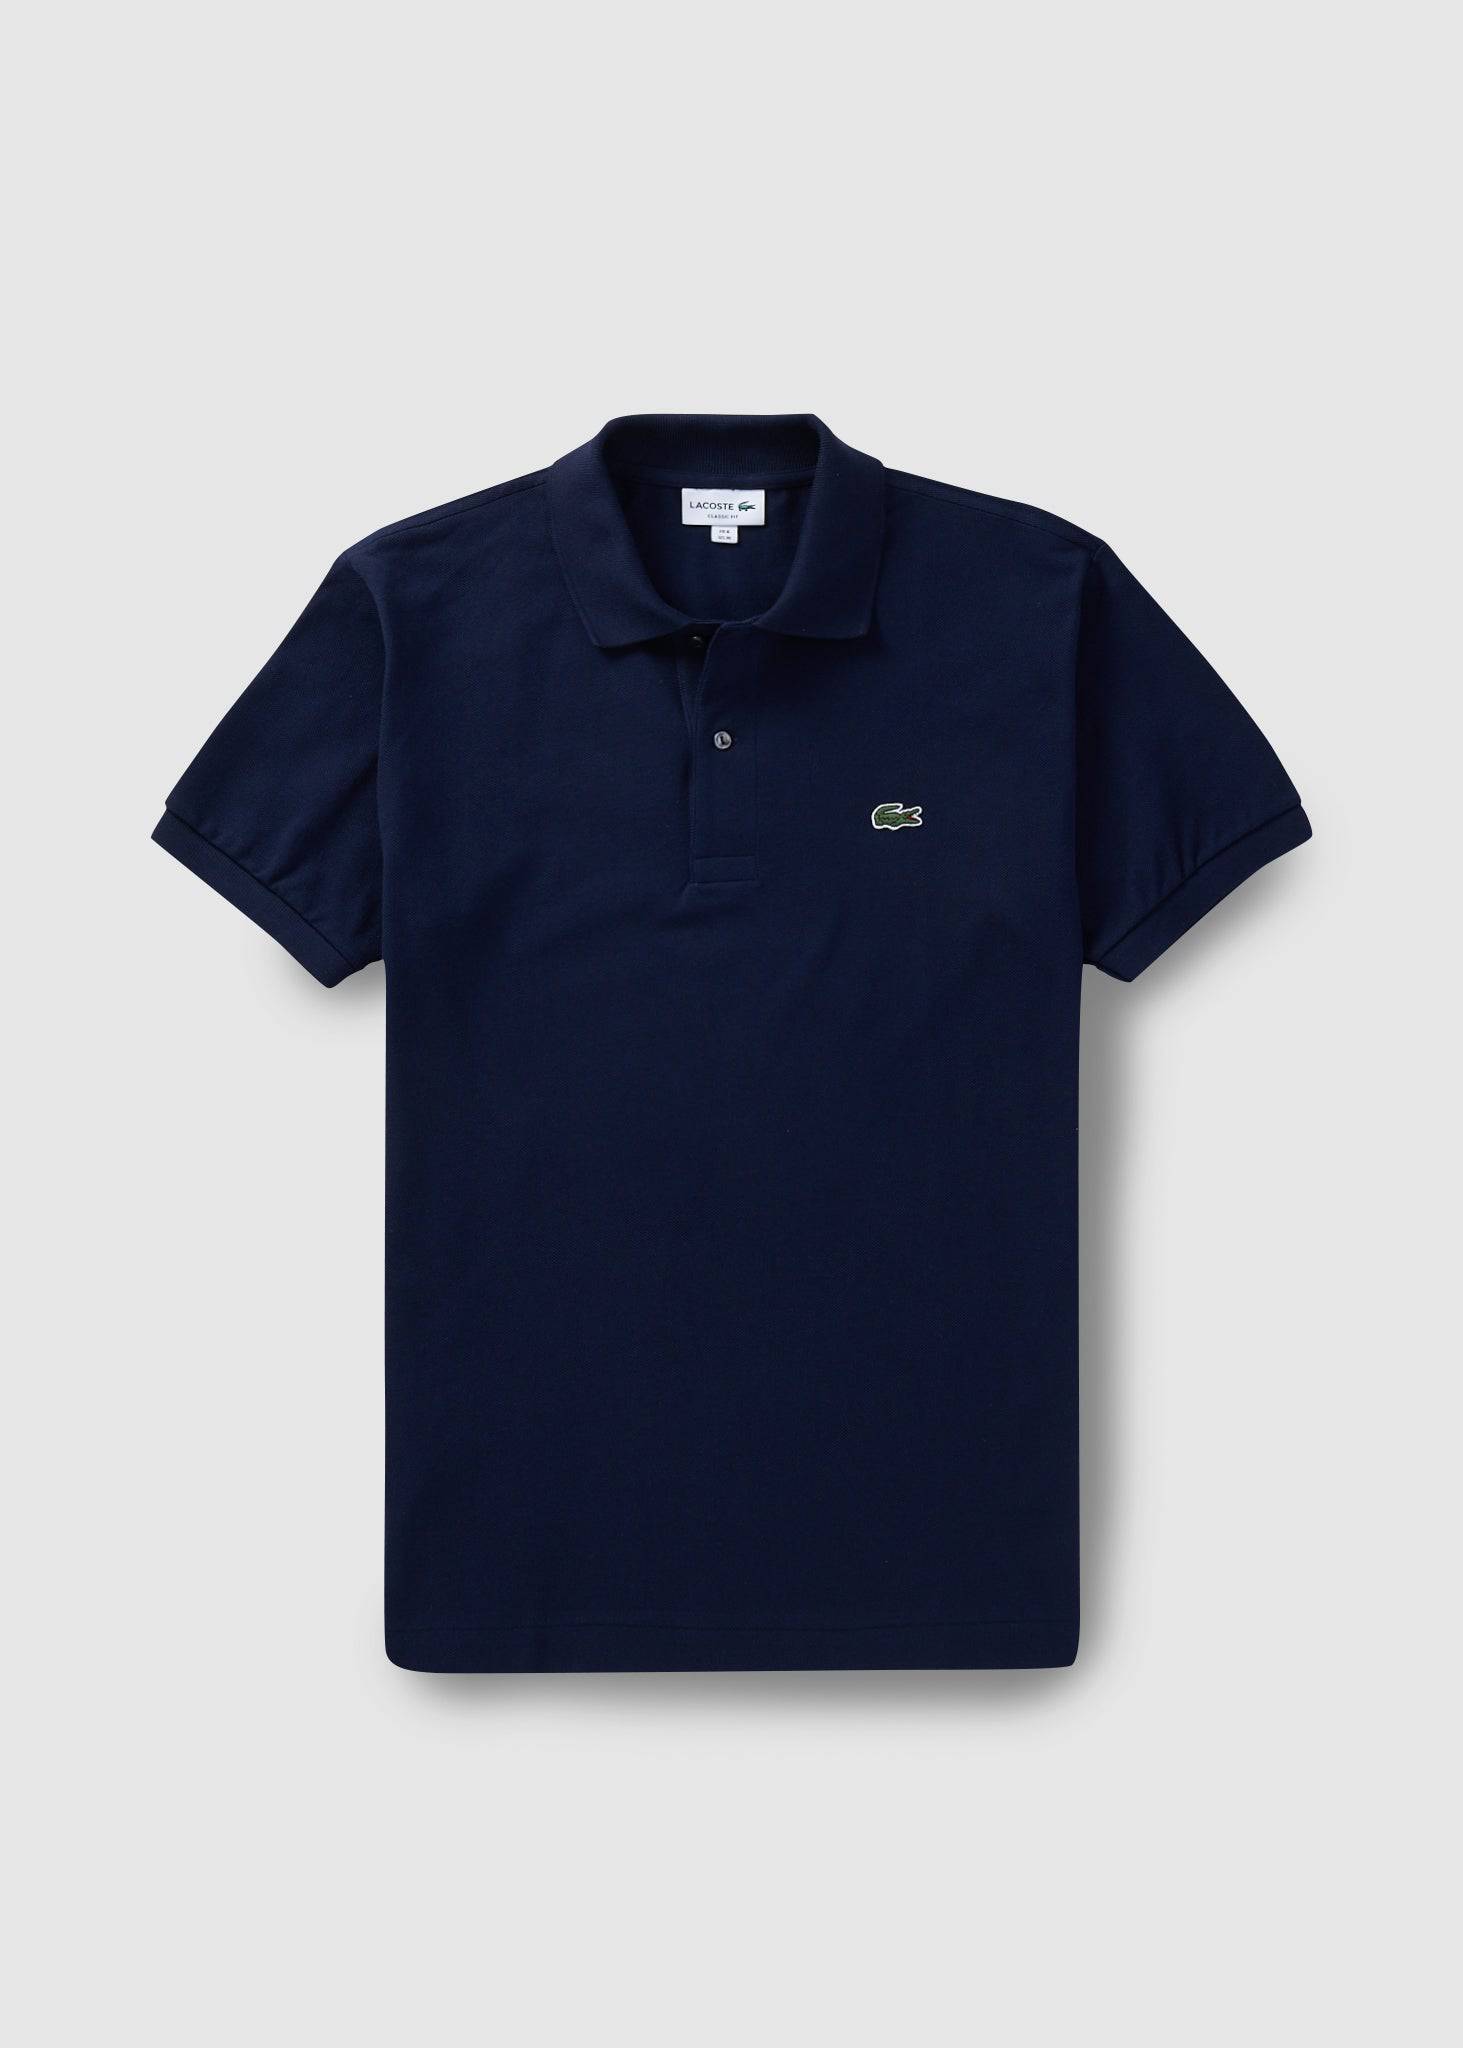 Image of Lacoste Mens Classic Pique Polo Shirt In Navy